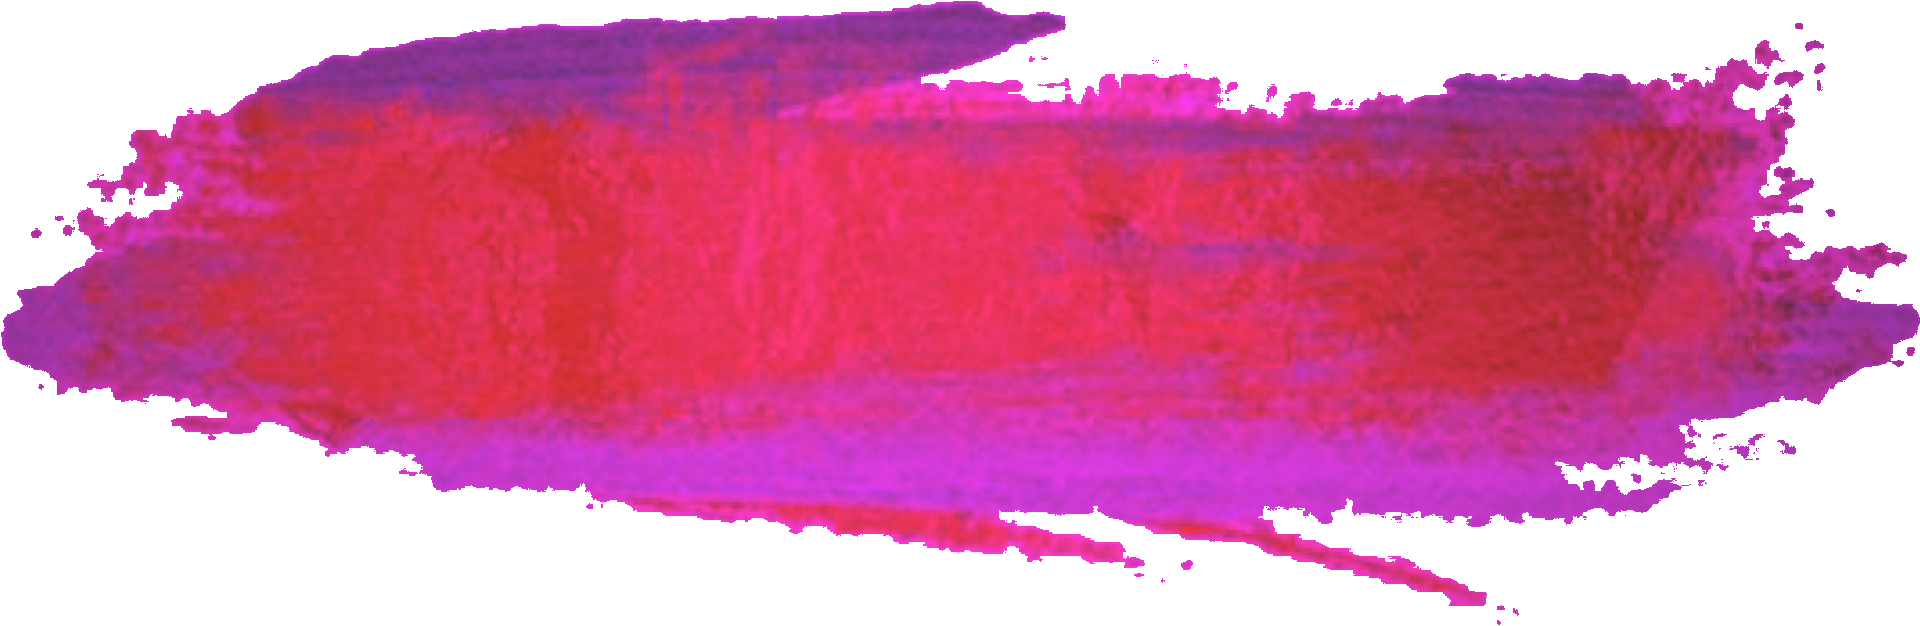 Vibrant_ Purple_ Red_ Stroke_ Background.png PNG image